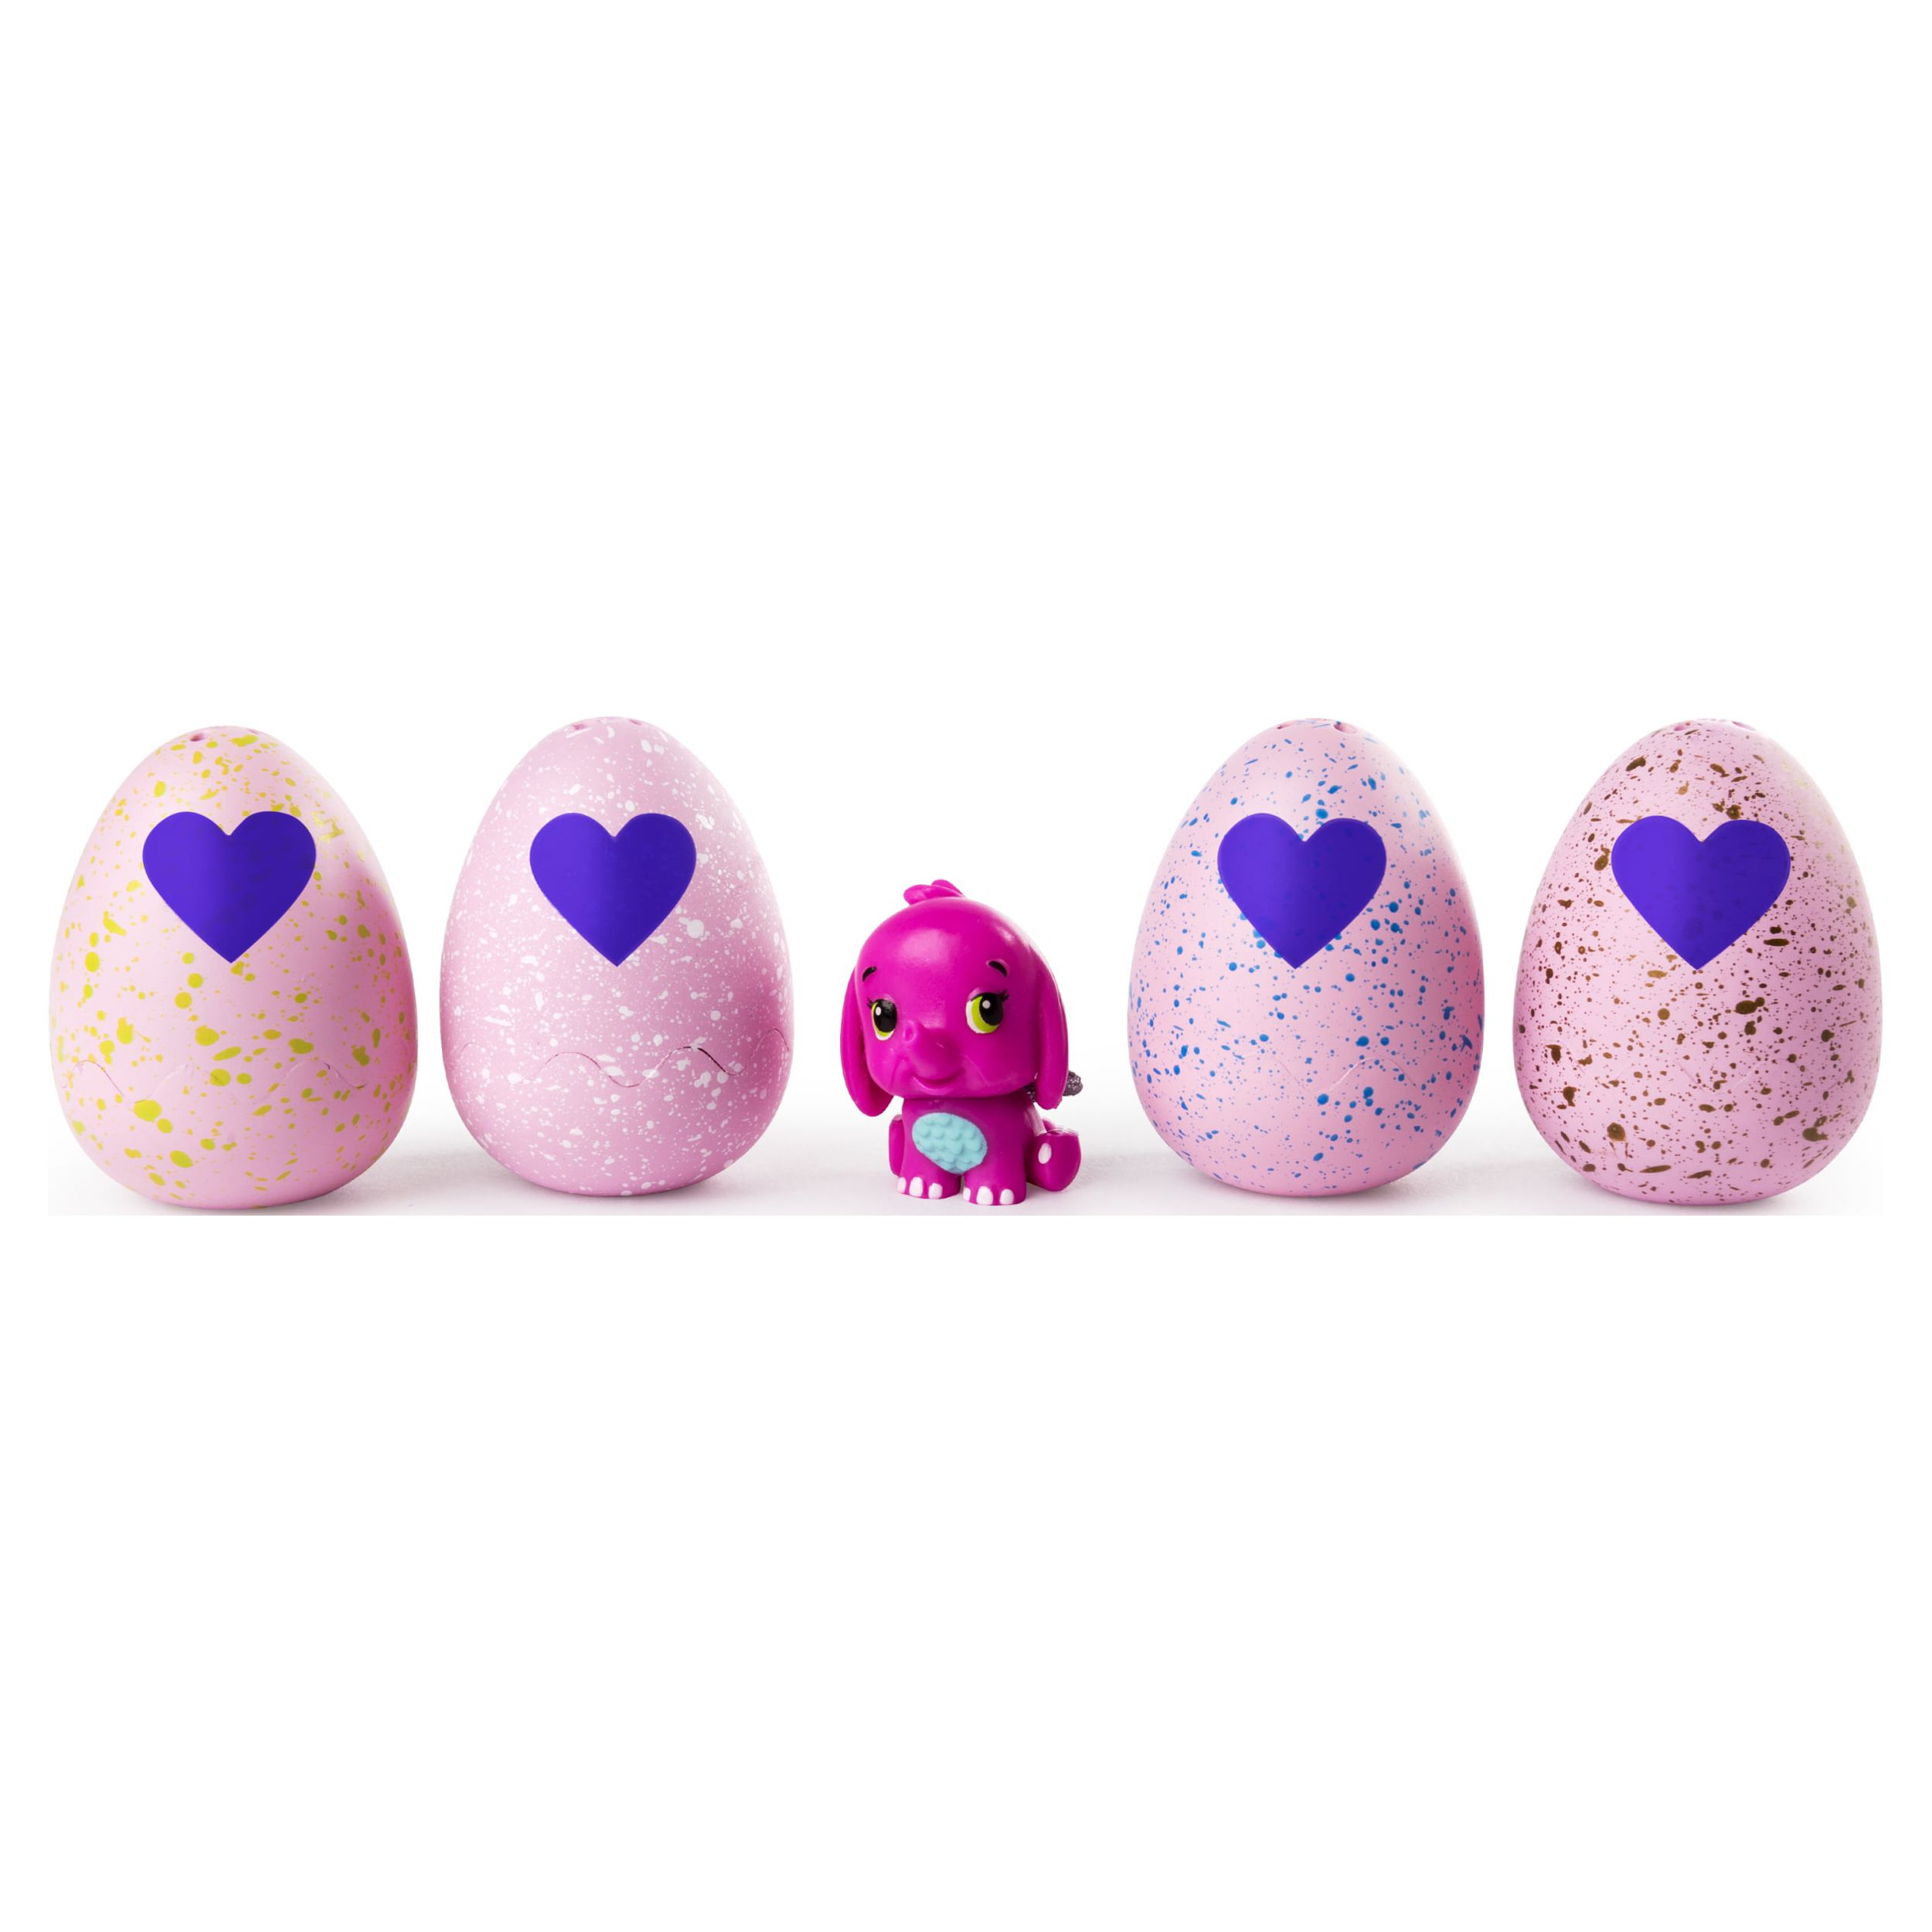 Hatchimals CollEGGtibles Season 2, 4 Pack + Bonus (Styles & Colors May Vary) by Spin Master - image 2 of 8